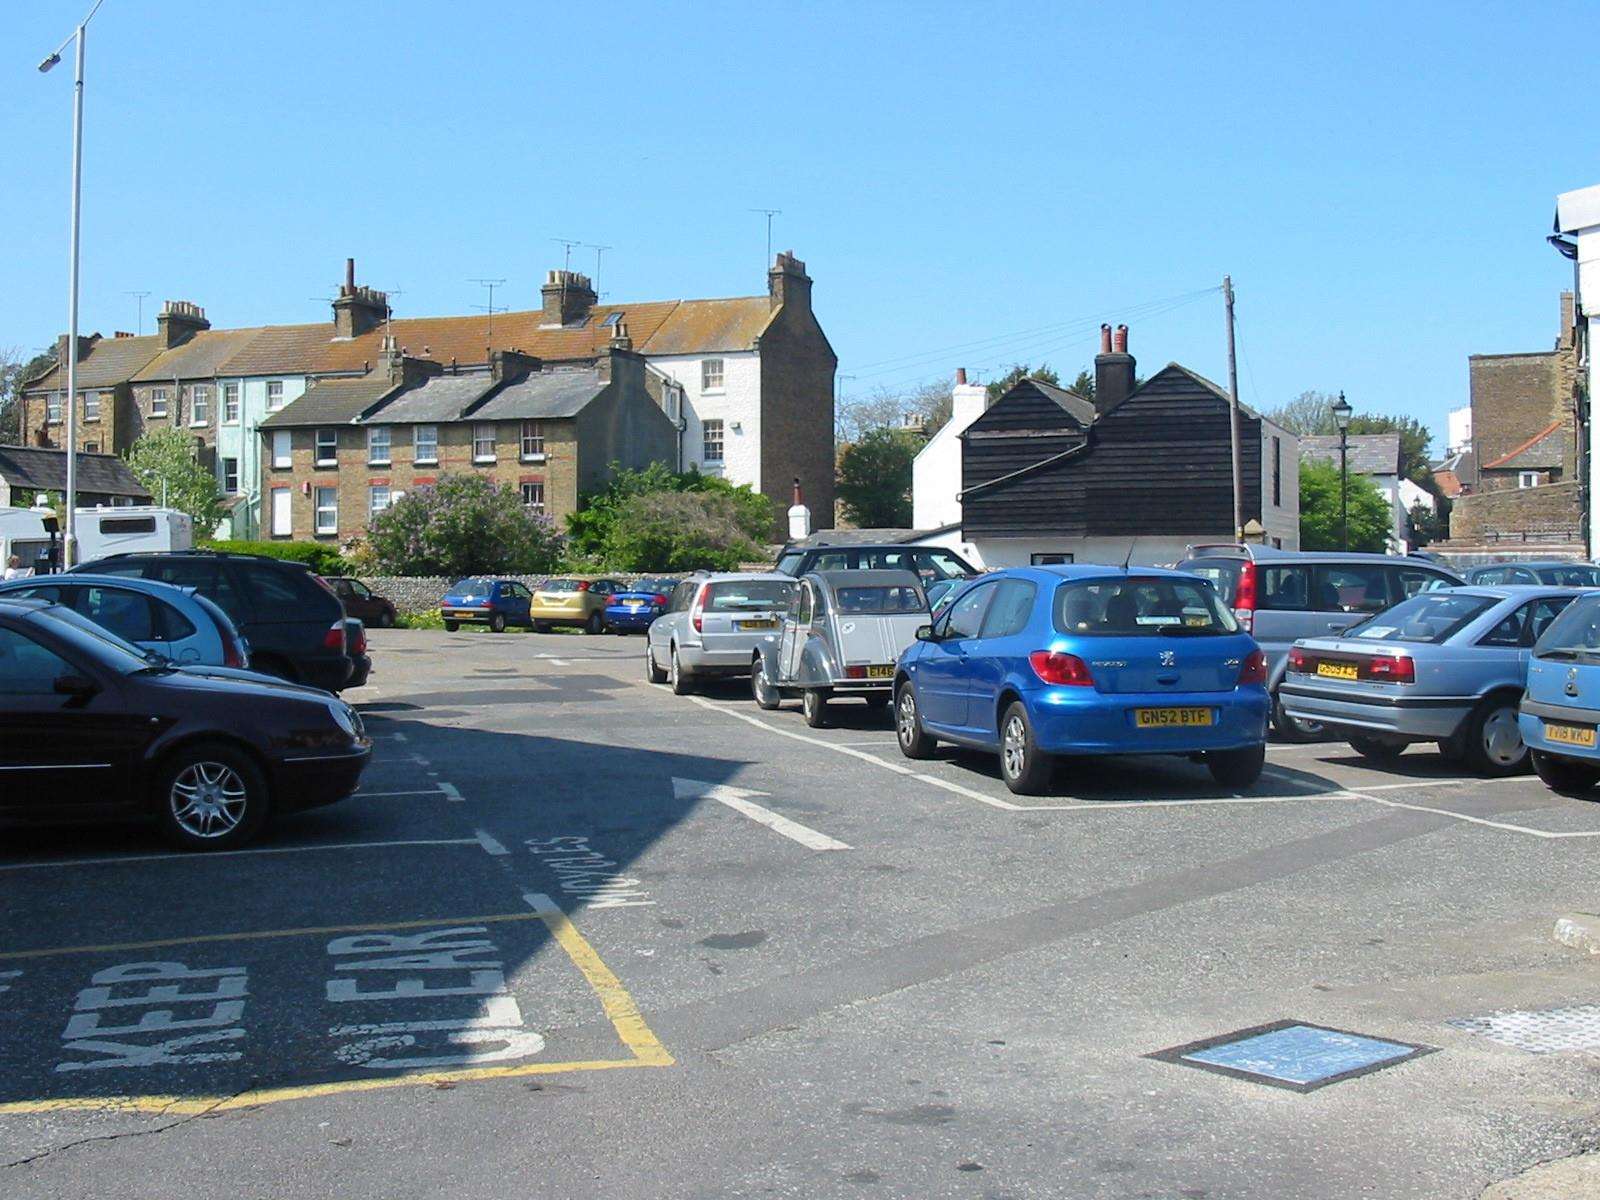 Albion Street car park, Broadstairs